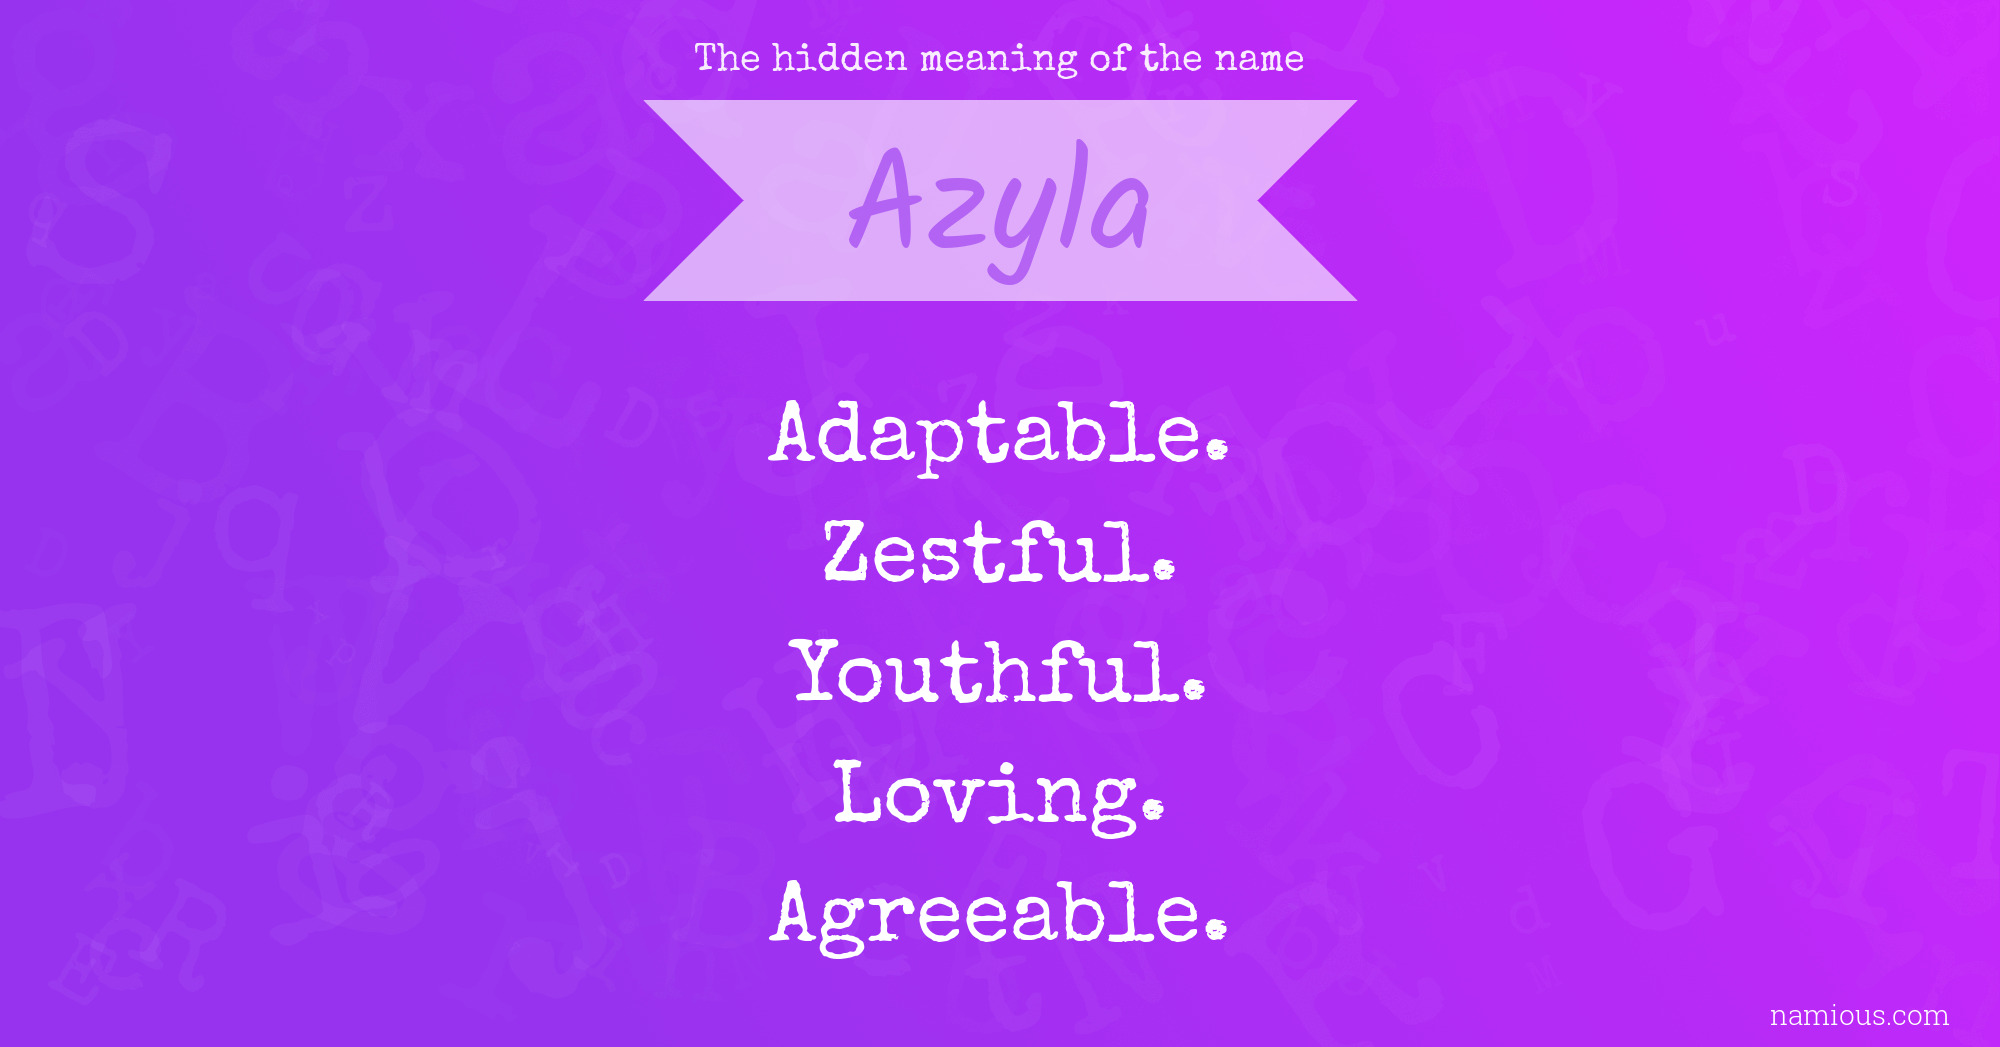 The hidden meaning of the name Azyla